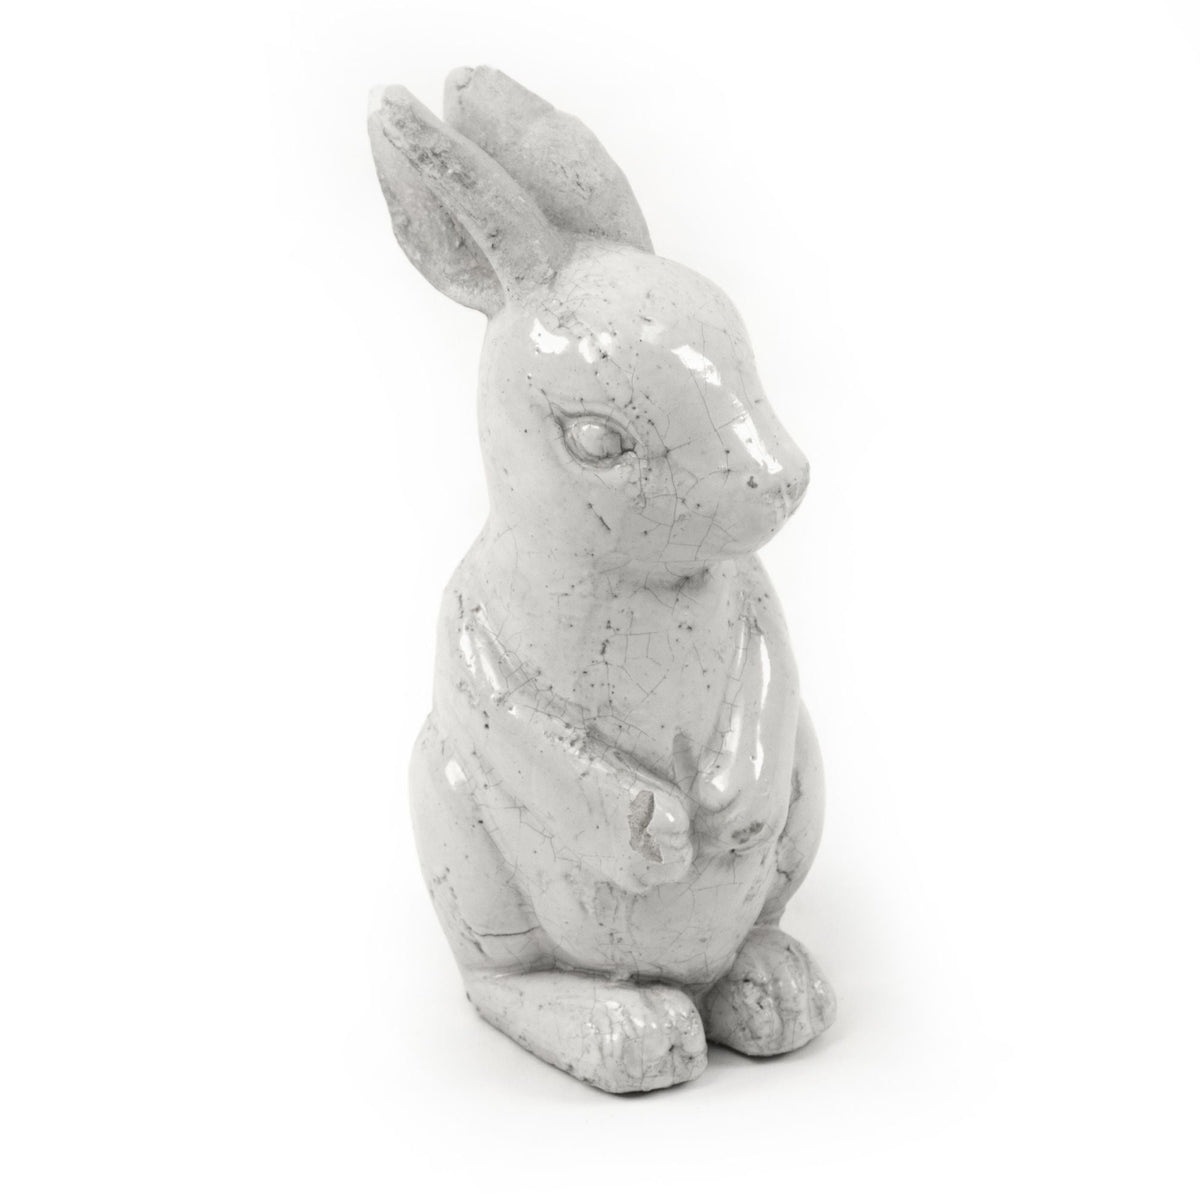 Distressed White Rabbit Small (4759S) by Zentique